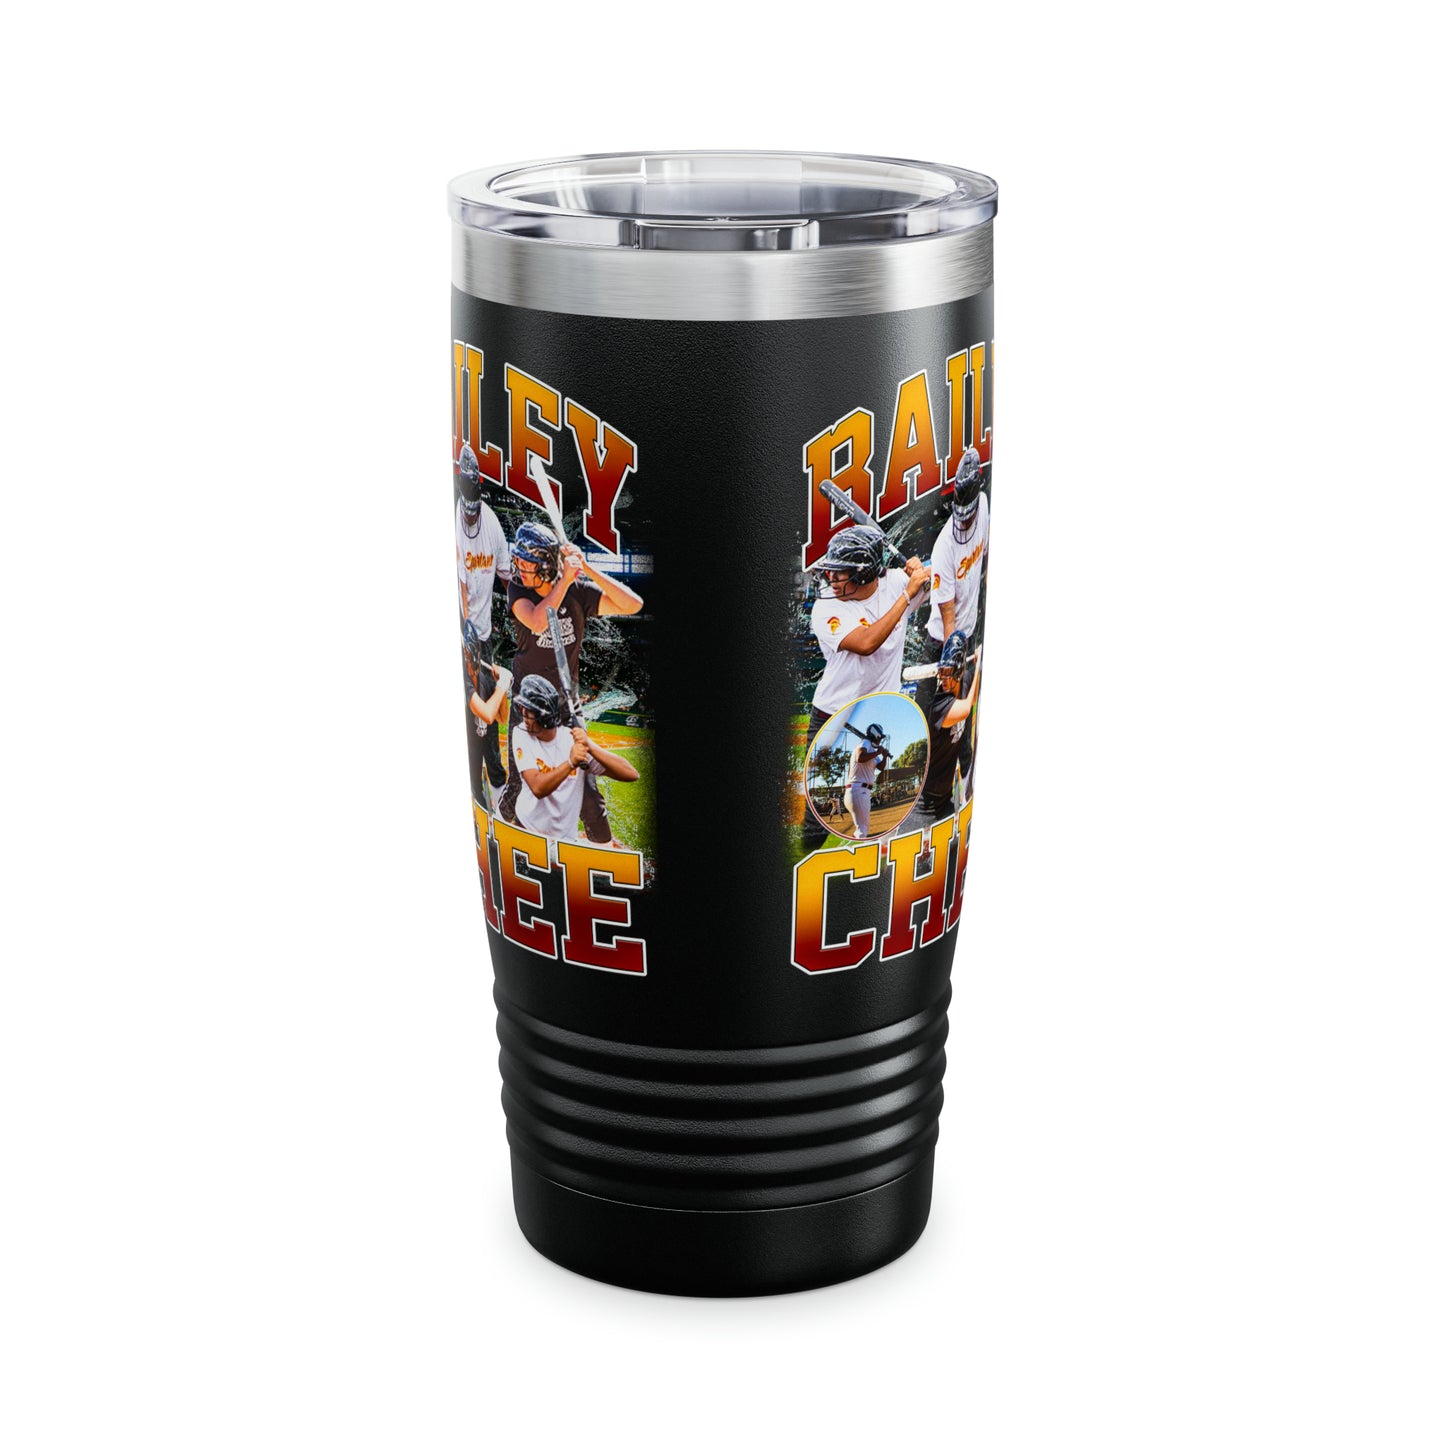 Bailey Chee Stainless Steel Tumbler